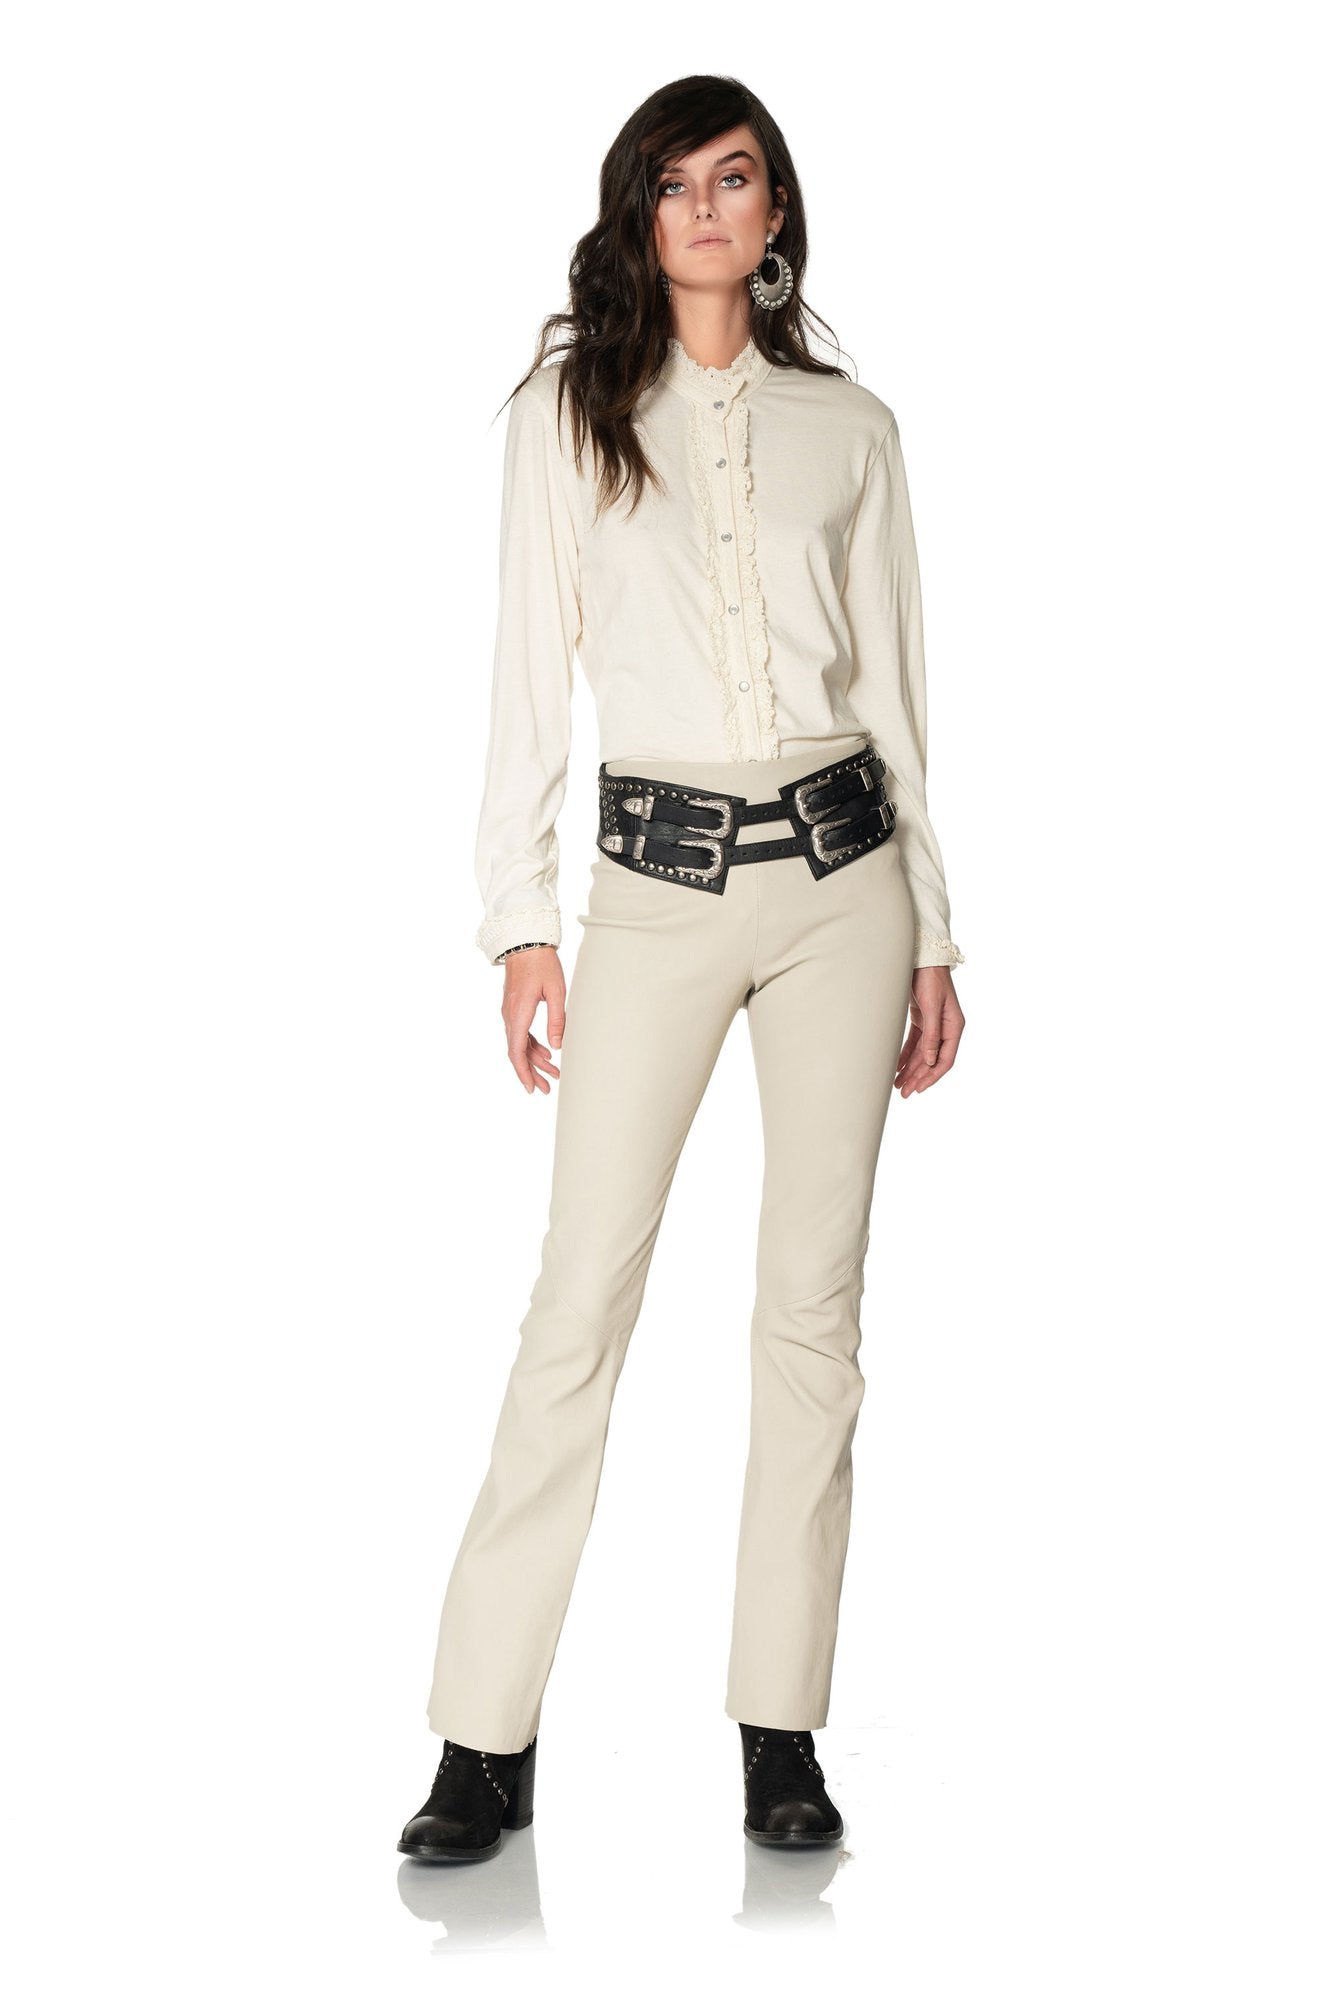 DDR Leather Bandit Pant P491 in string/white flare leg at 6Whiskey six whisky Maria Spring 2021